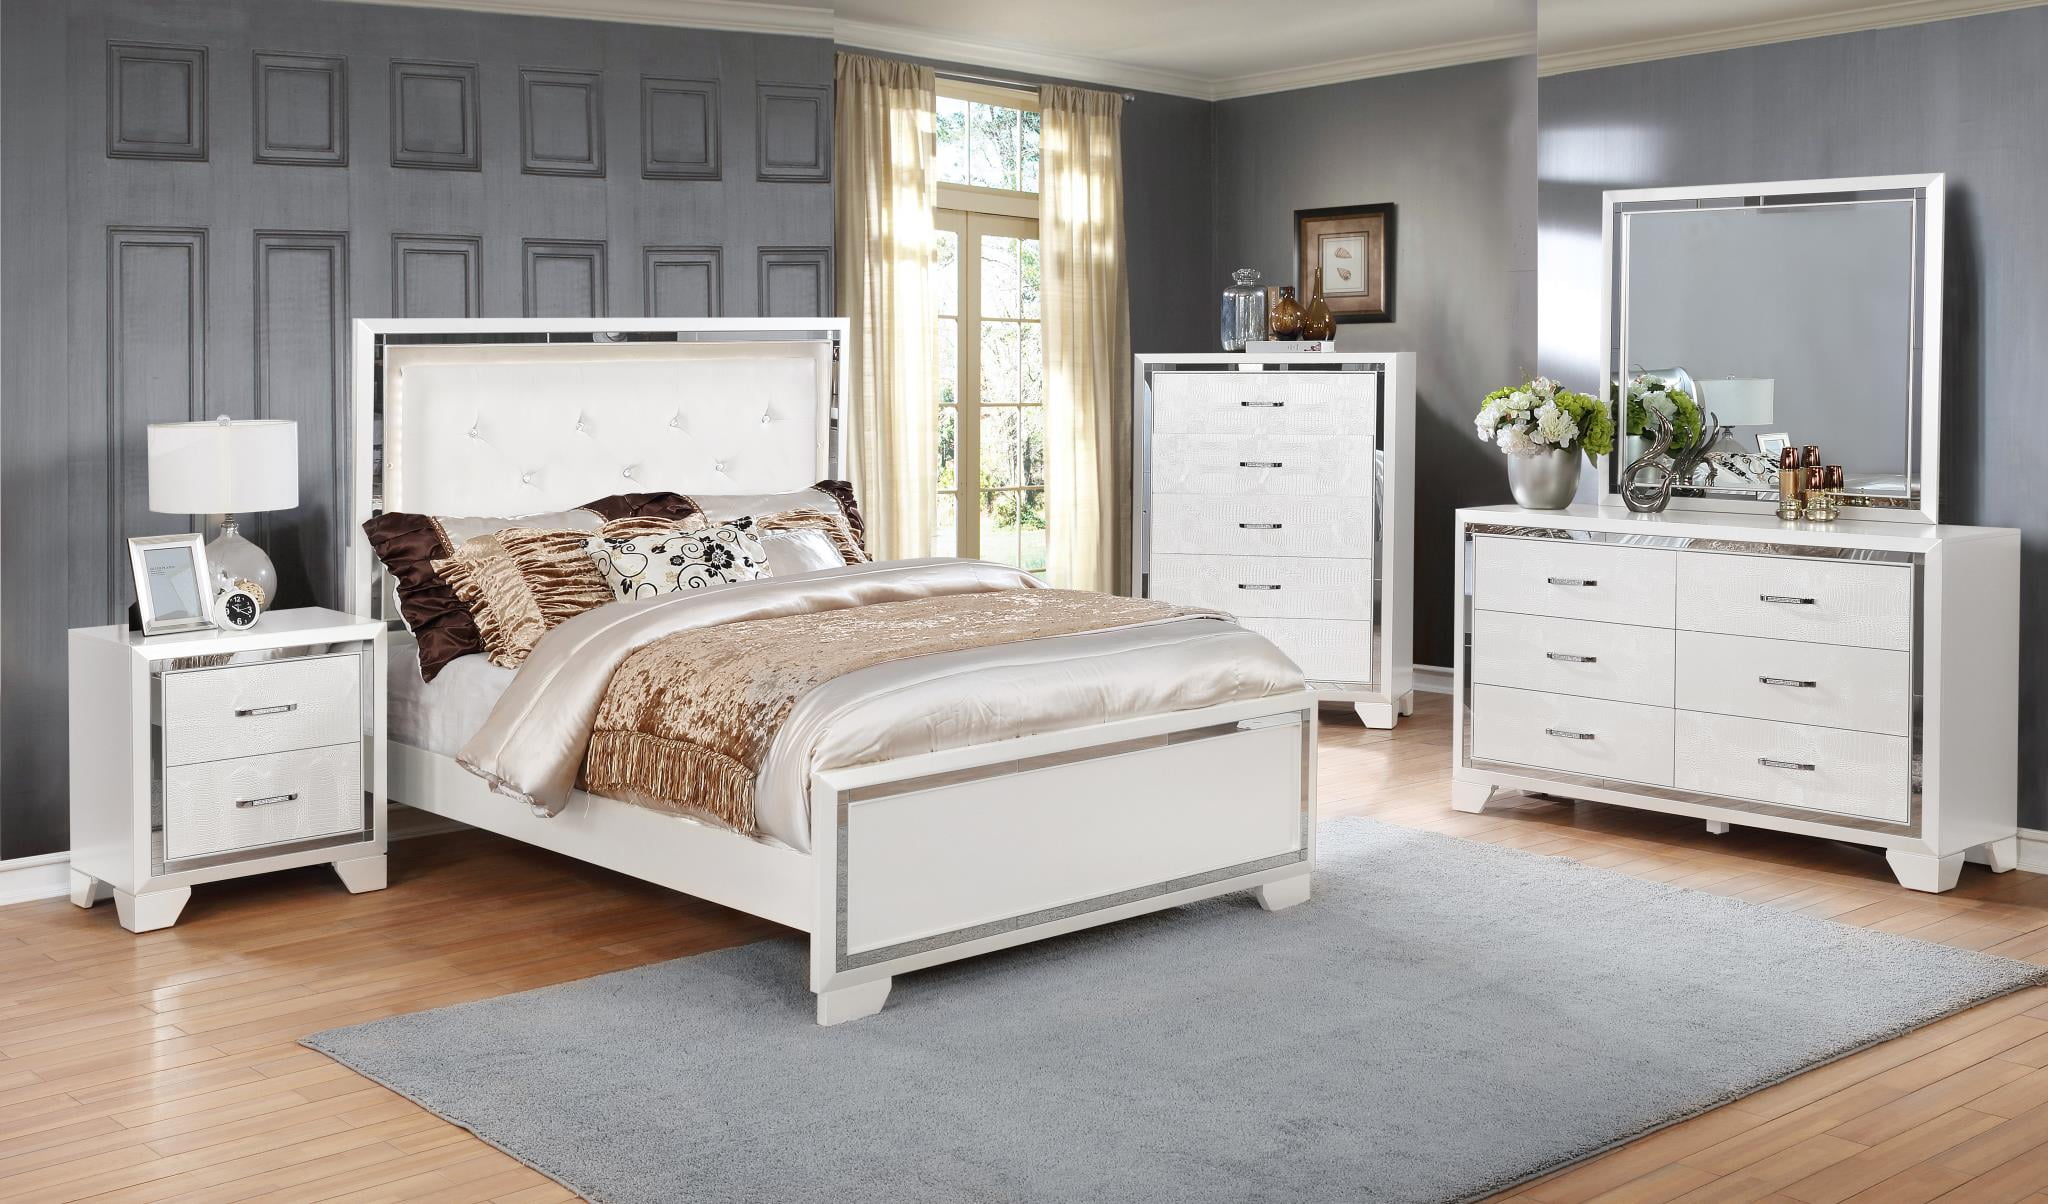 GTU Furniture Contemporary White and Silver Style Wooden King Bedroom Set (King Size Bed, 5Pc